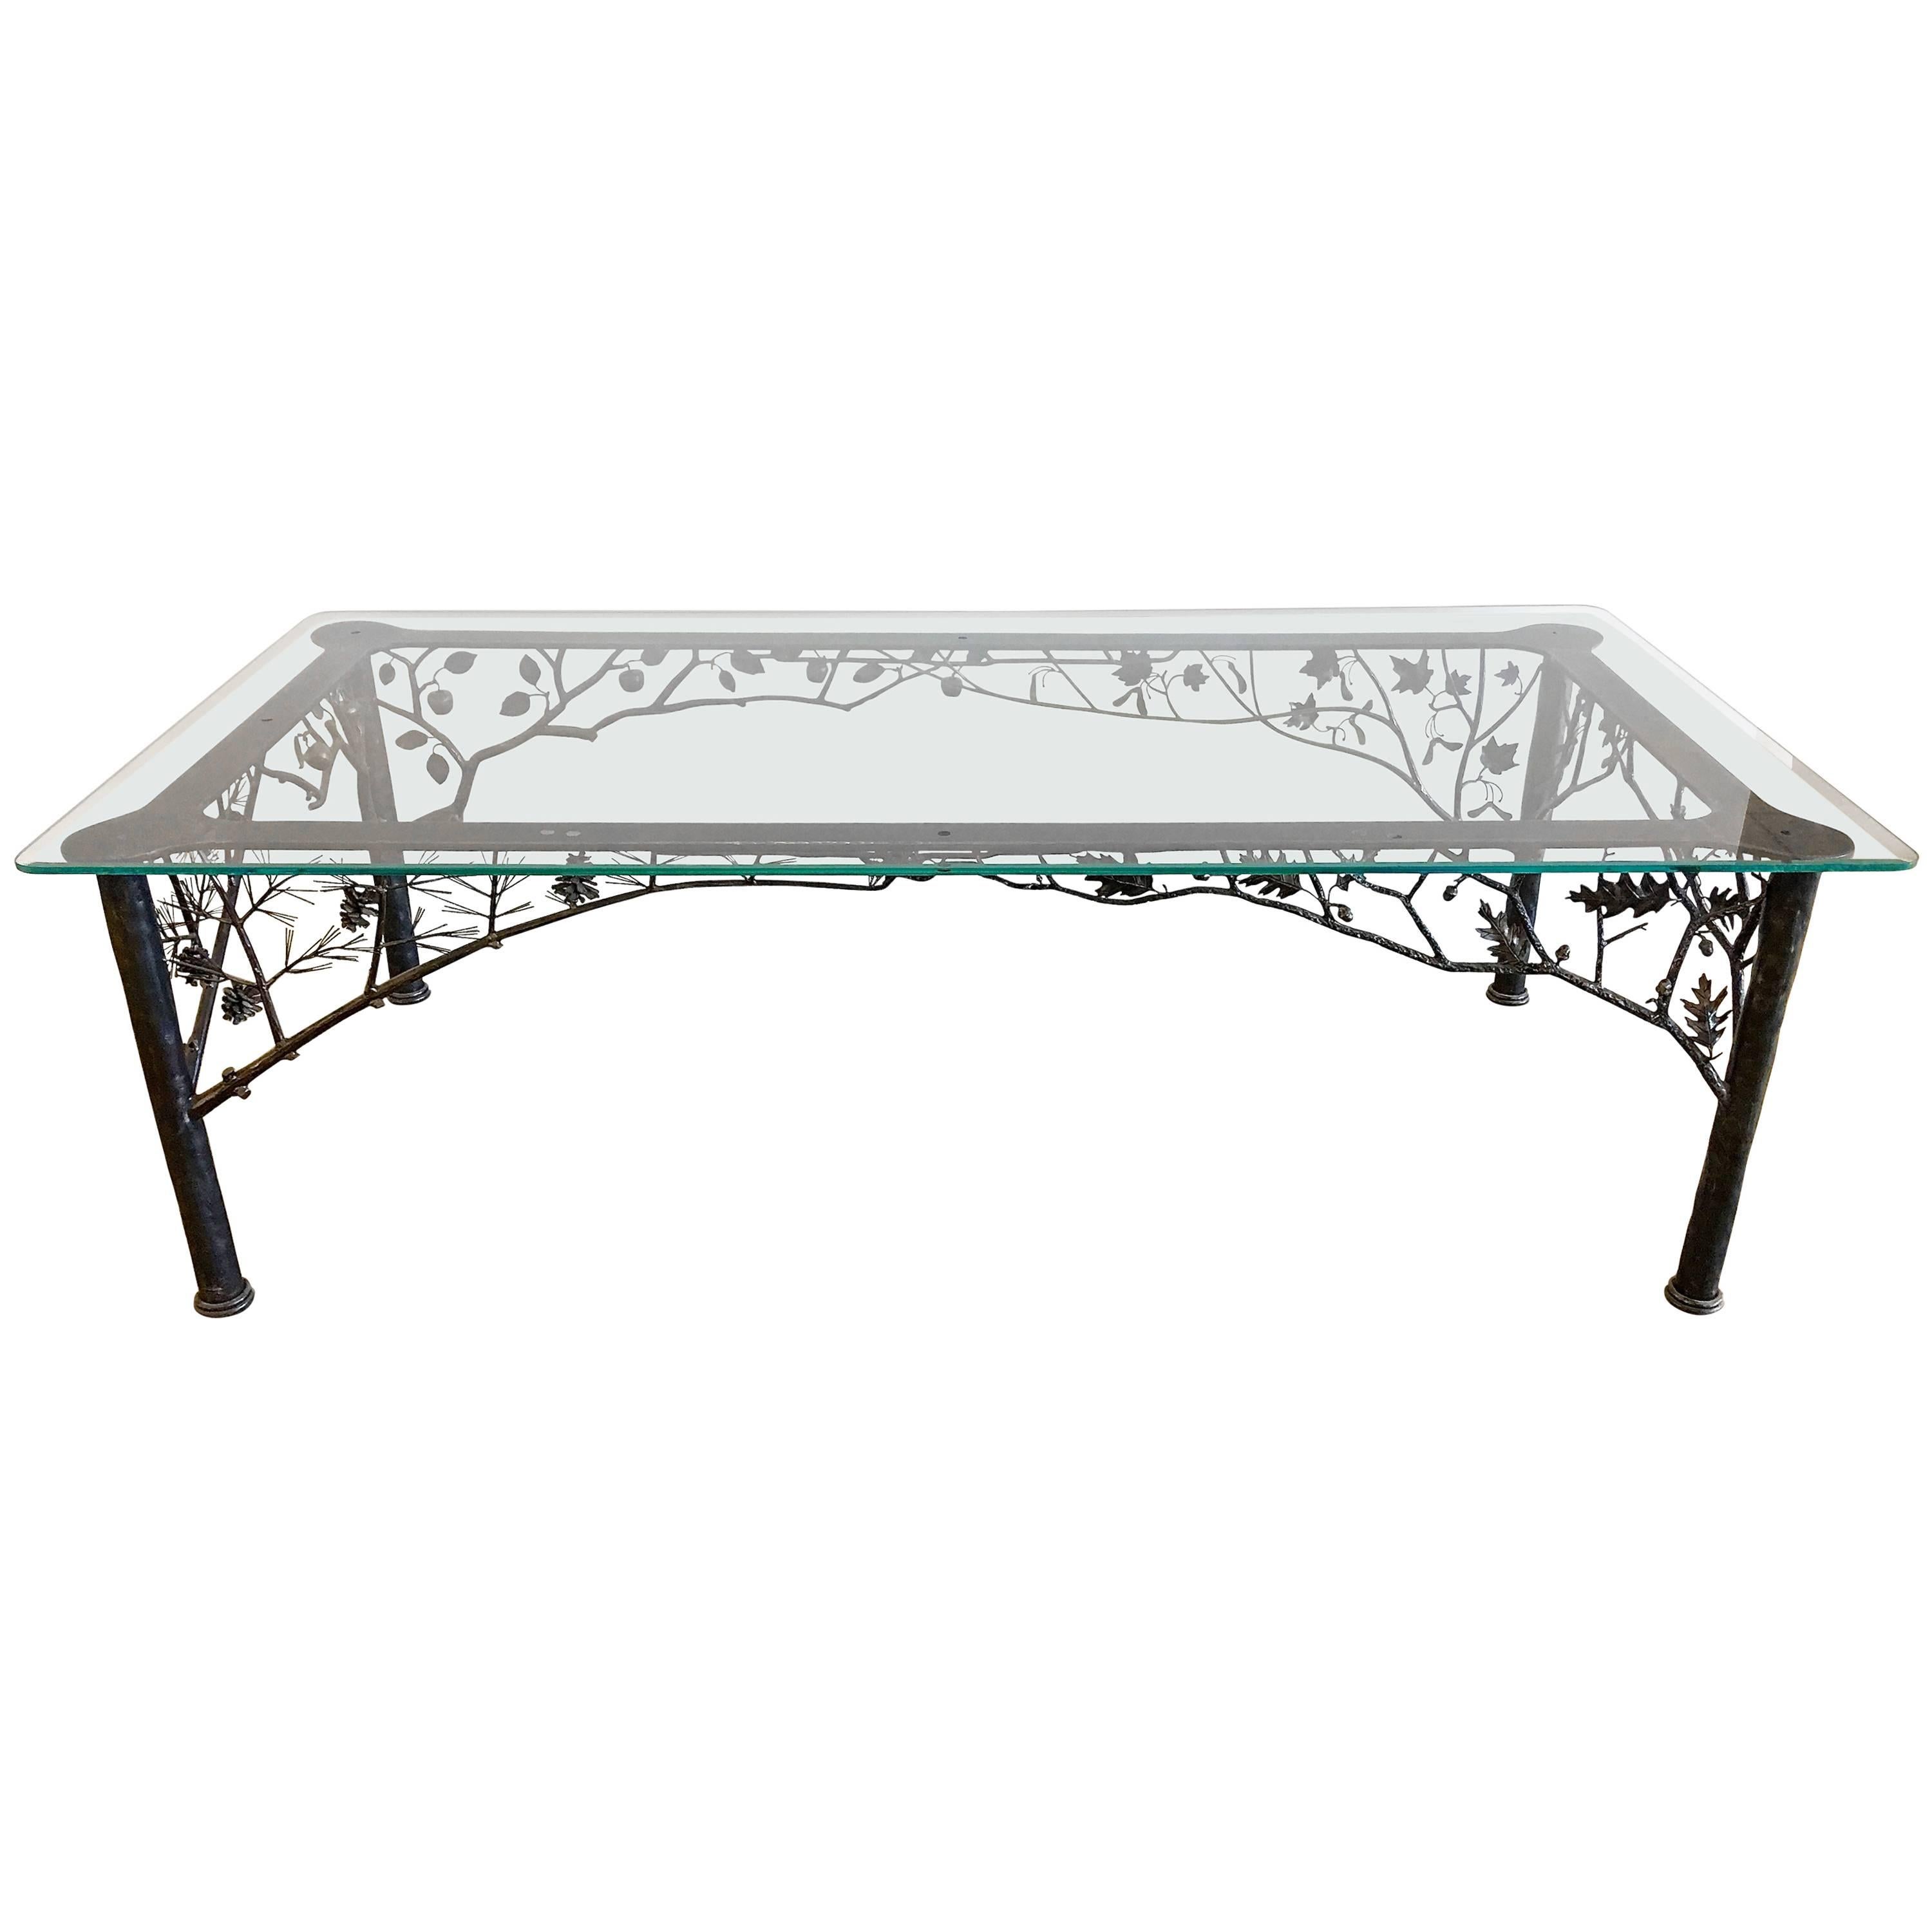 "Four Seasons" Sculptural Wrought Iron Dining Table by Dereck Glaser